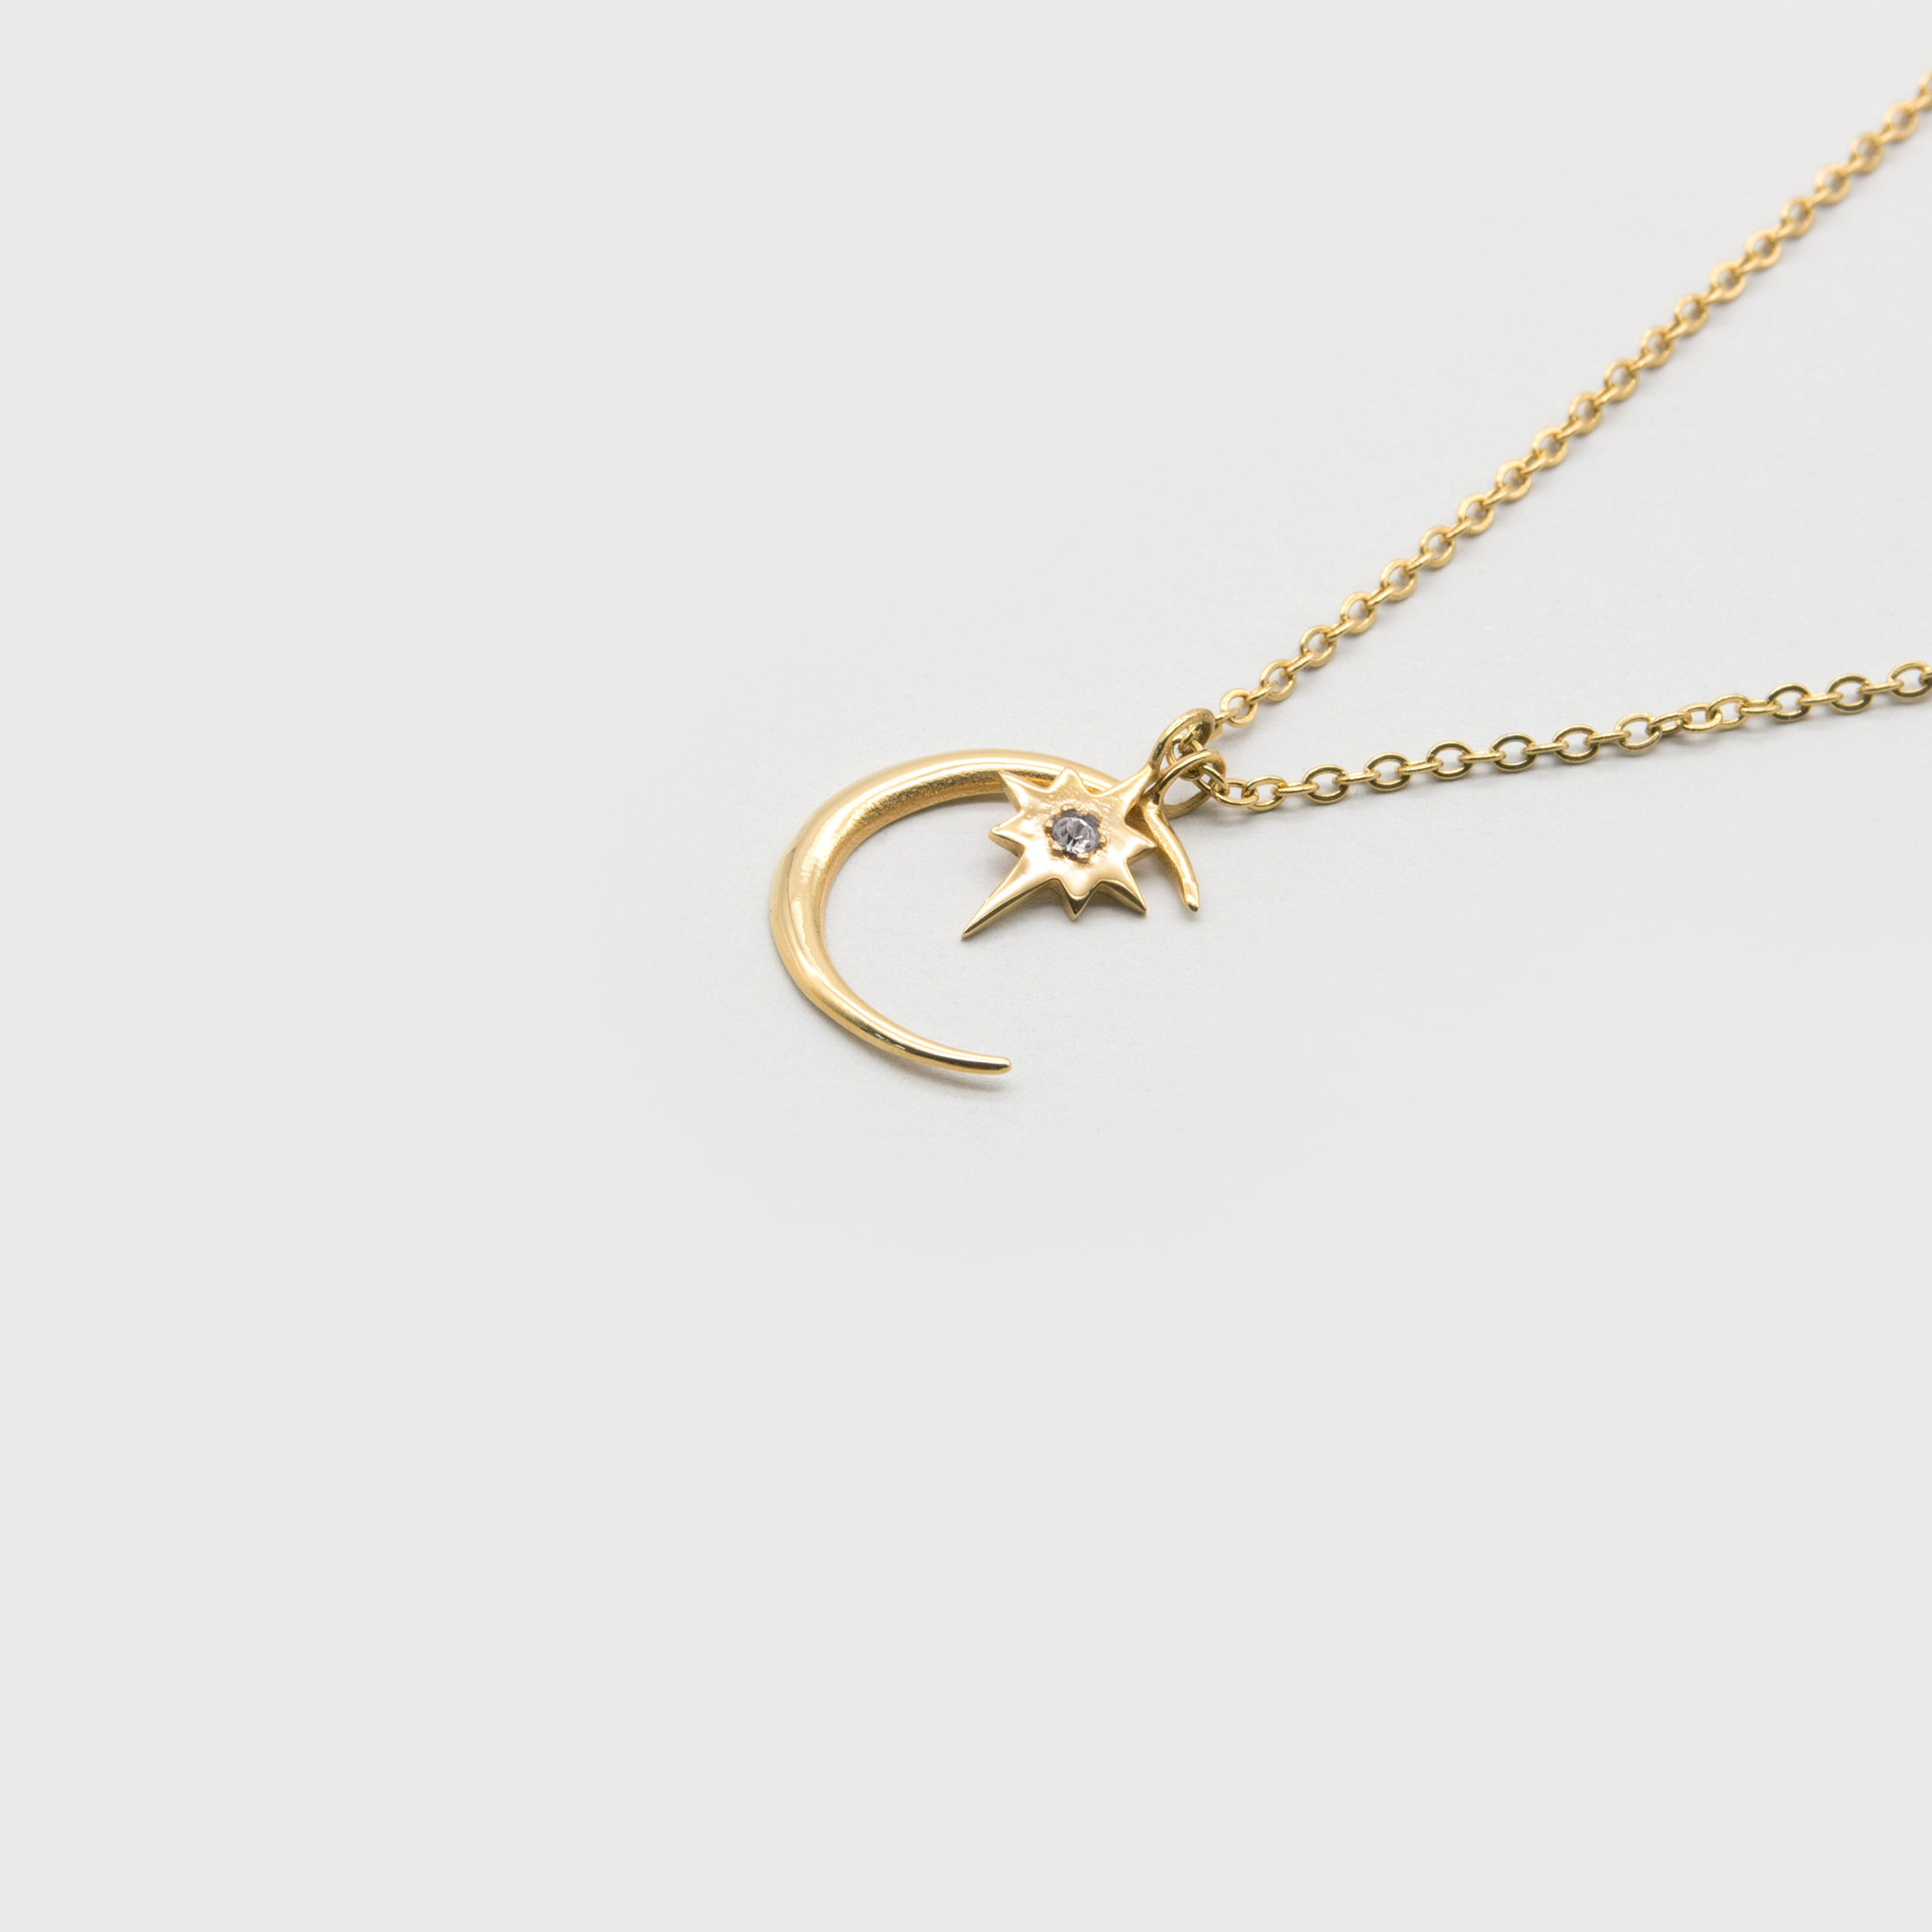 Kuku gold moon necklace with star charm